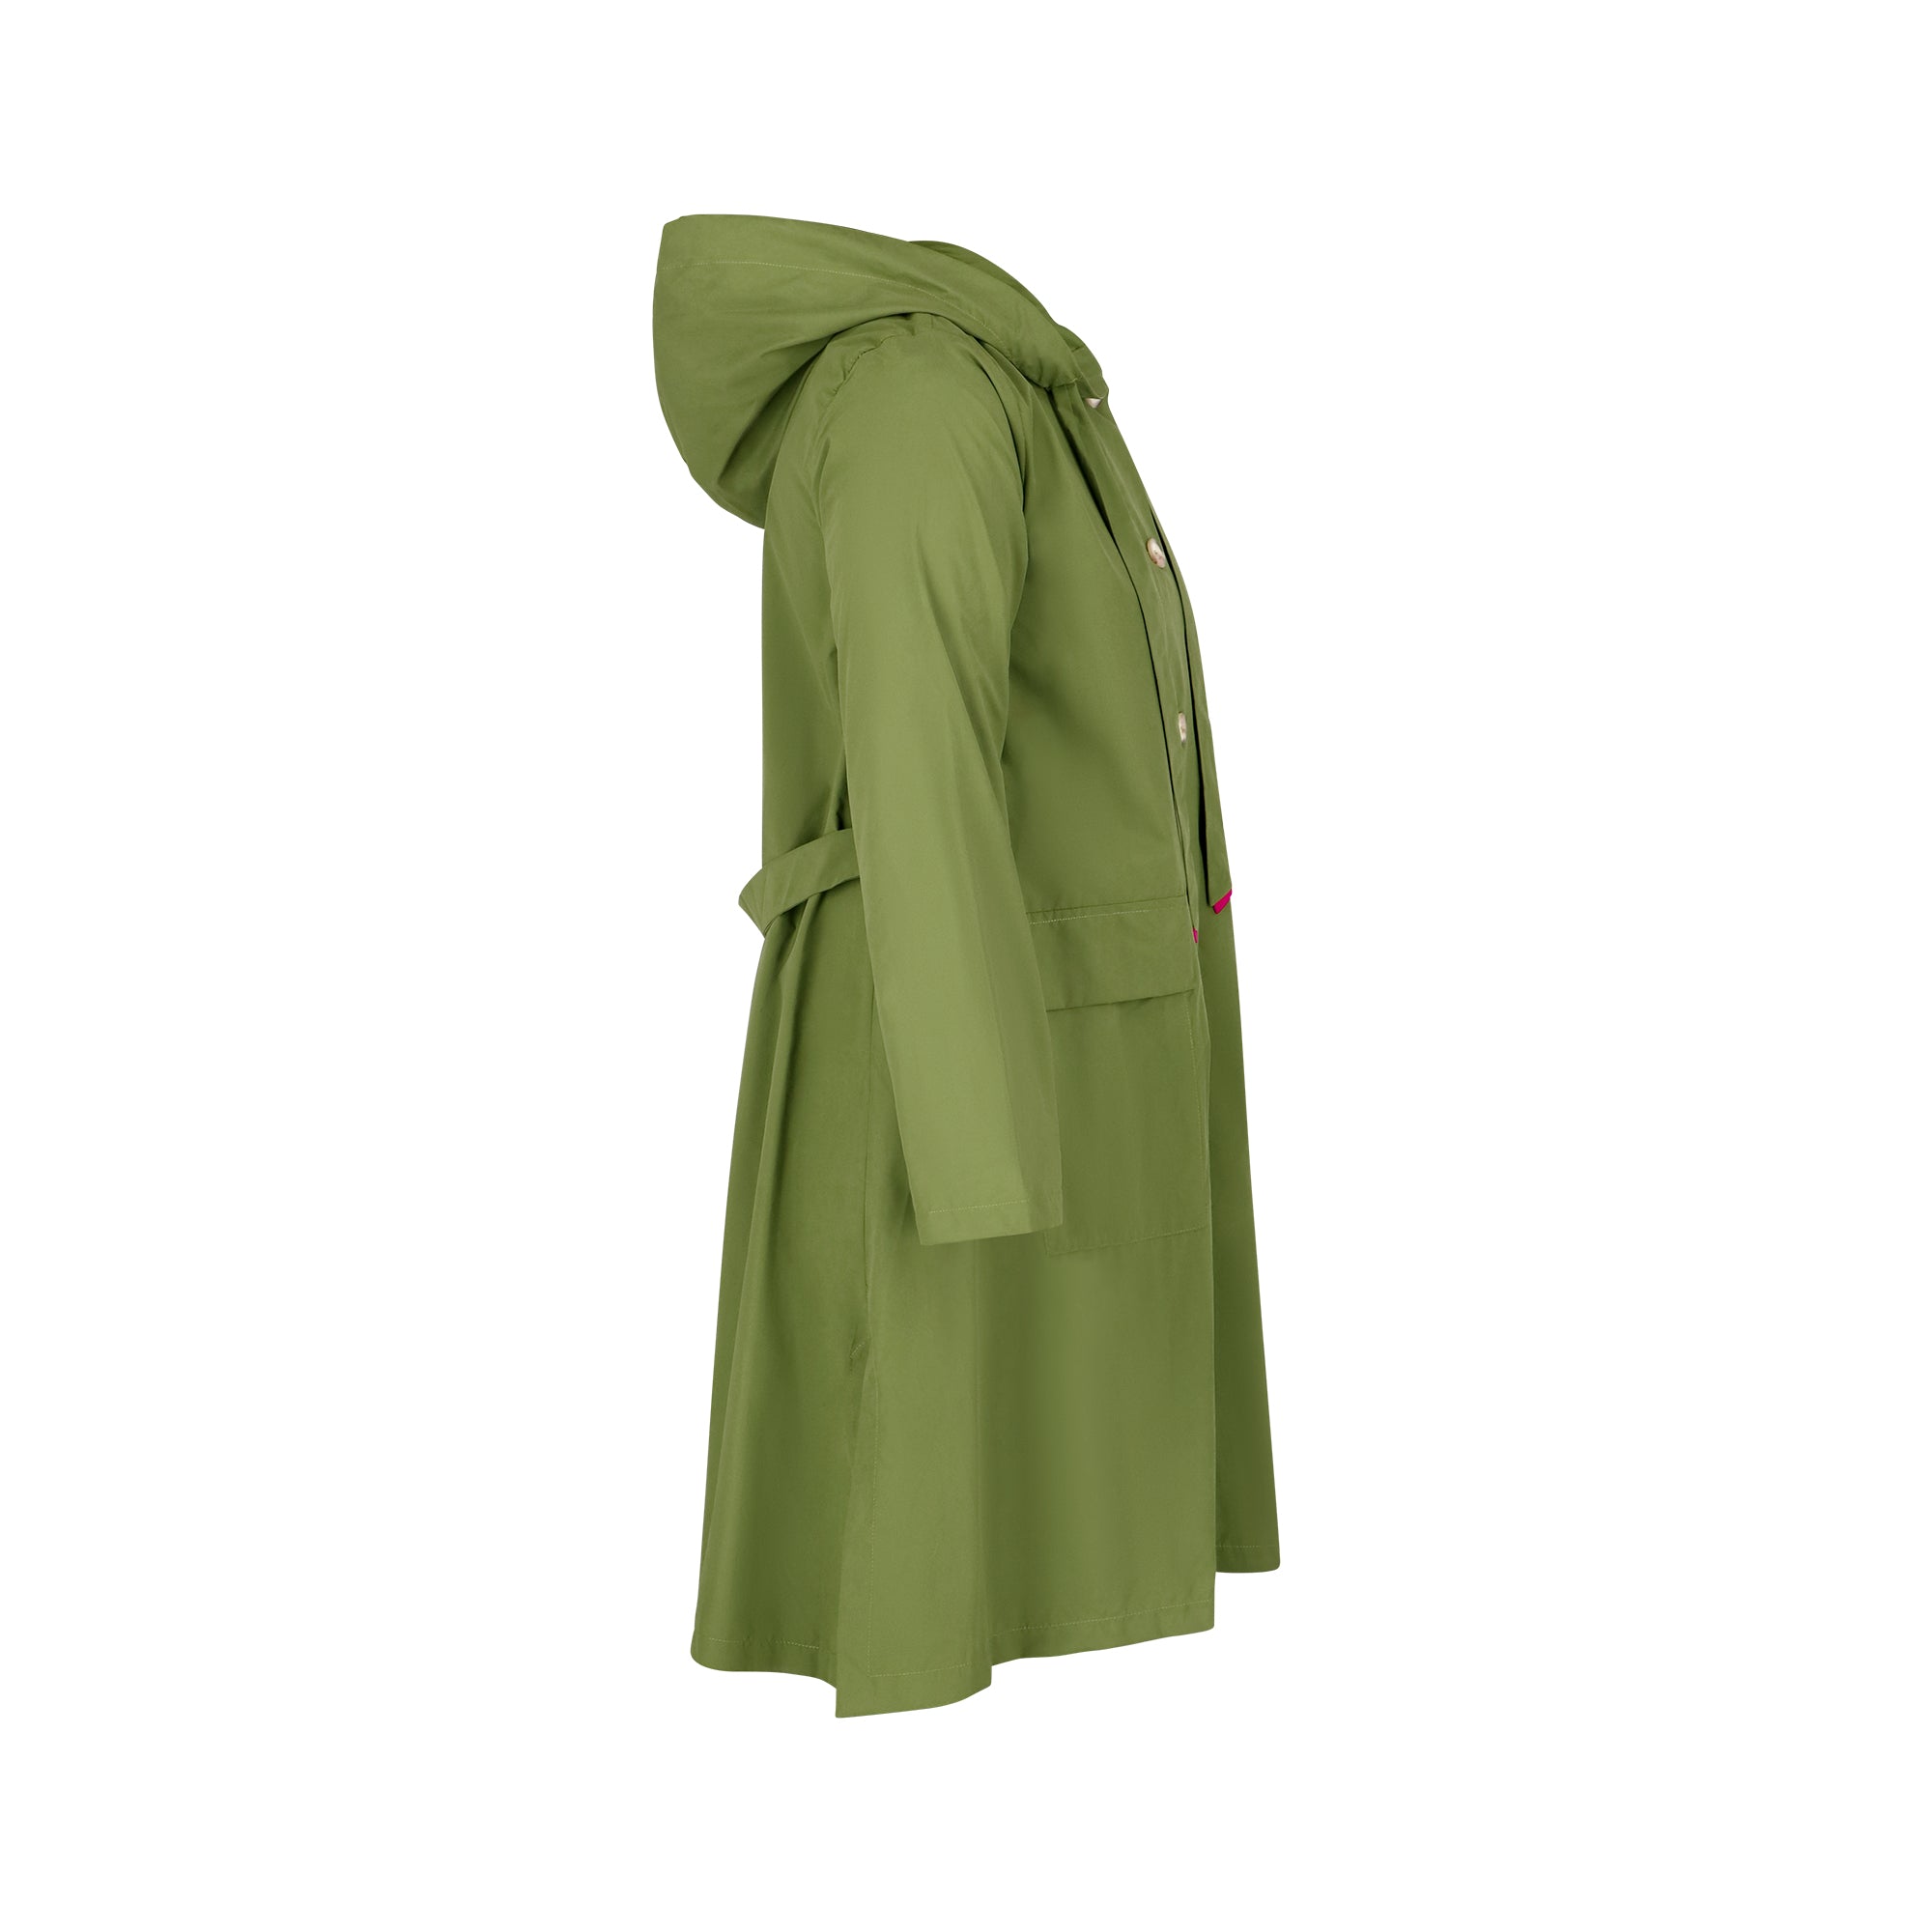 The classic raincoat - green color - side view